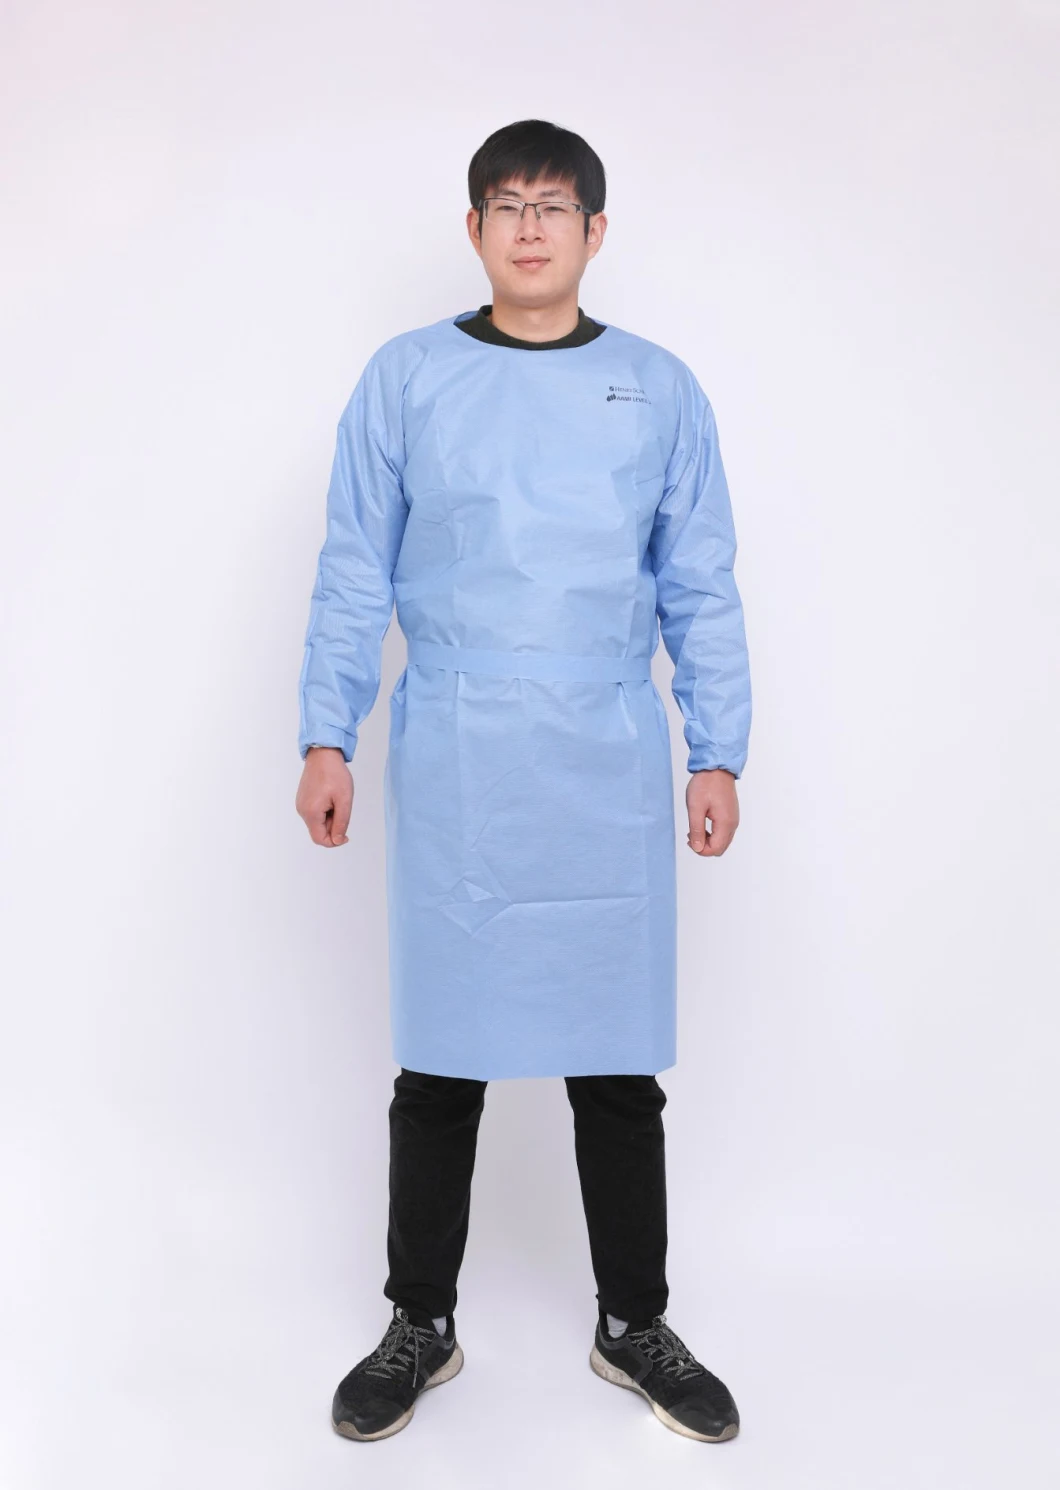 in Stock Microporous Medical Protective Clothing Sterile/Non-Sterile Coverall Scrub Suit Gown Disposable 510K CE